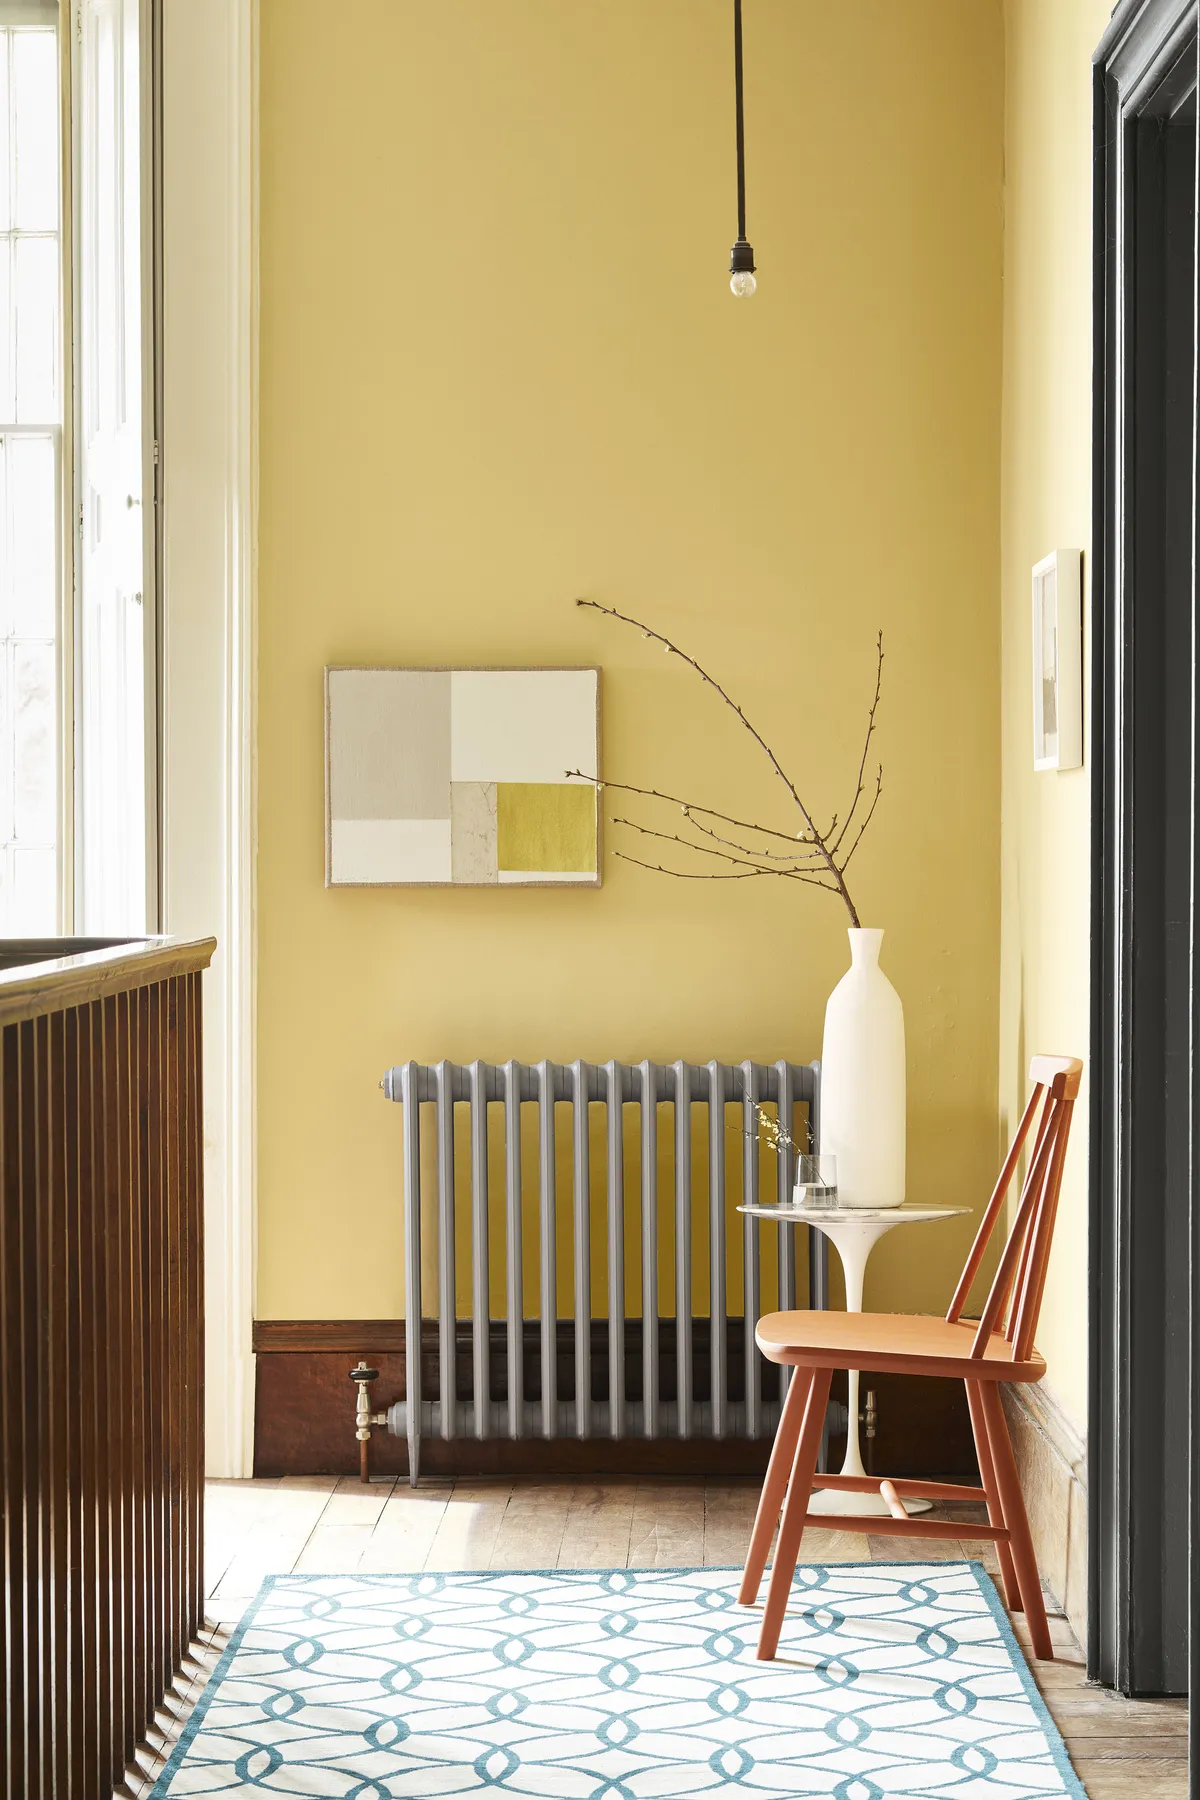 Wall painted in absolute matt emulsion in Light Gold; radiator painted in Urbane Grey, both from £23.50 per litre, Little Greene